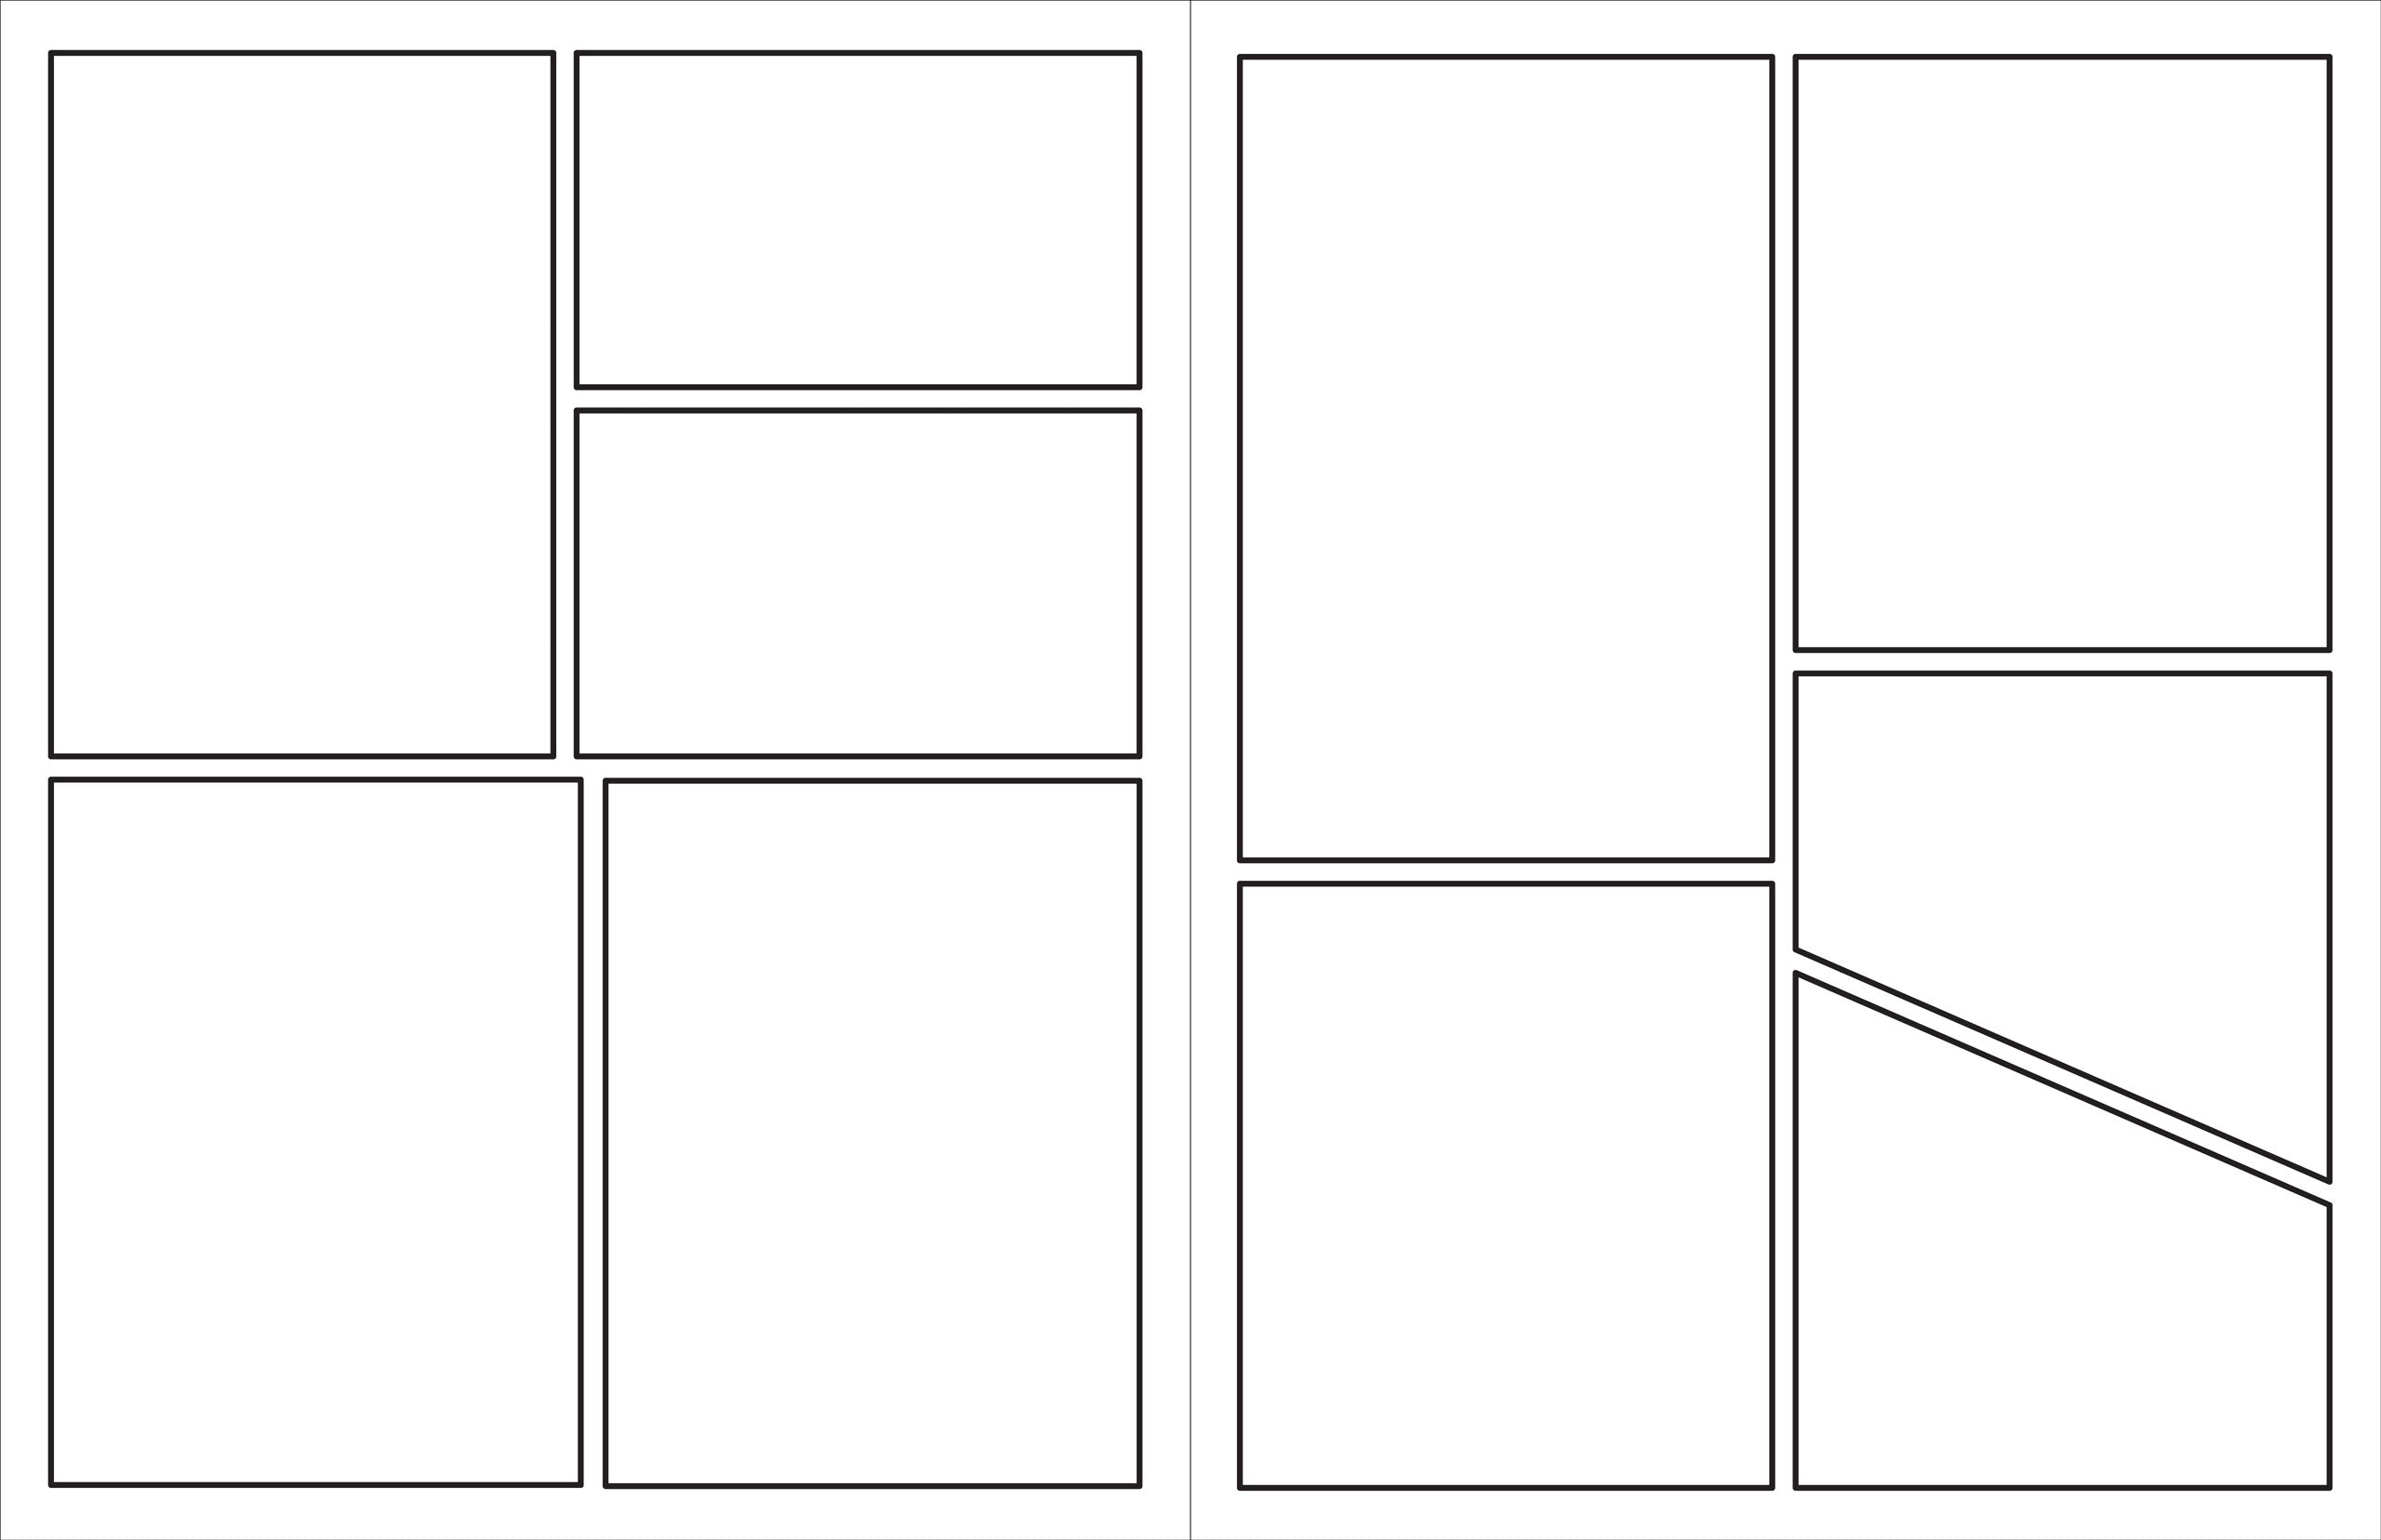 Create Your Own Comic Book Kit - project book, 2 blank comic books,  stickers